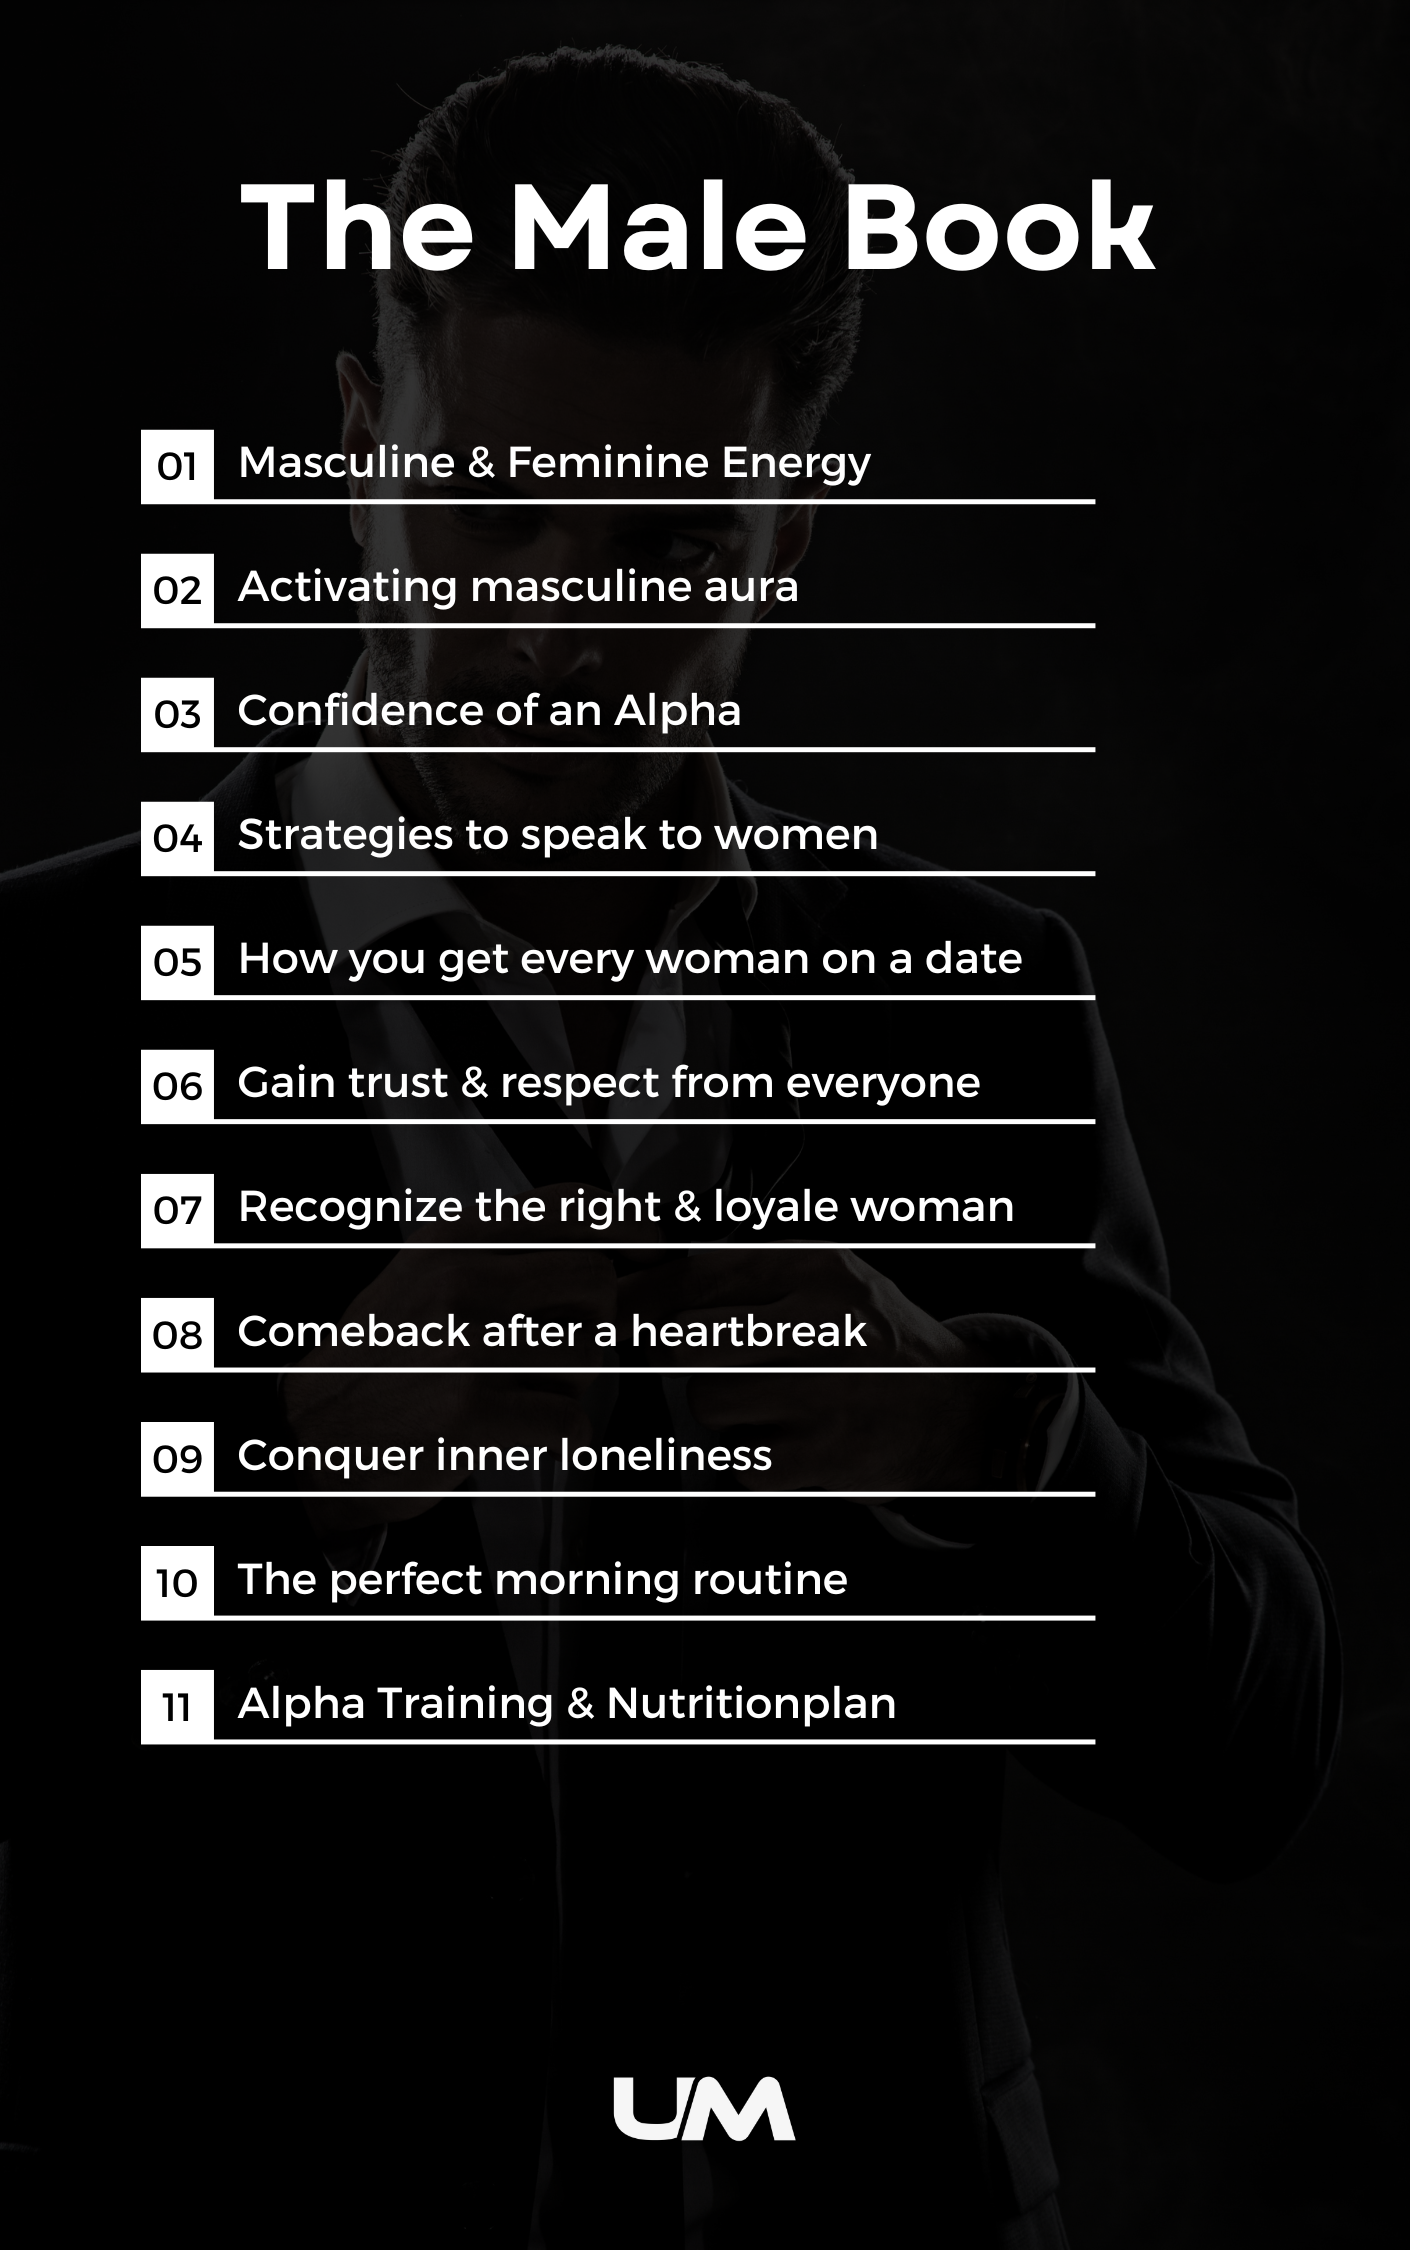 AlphaBook: Become a real man